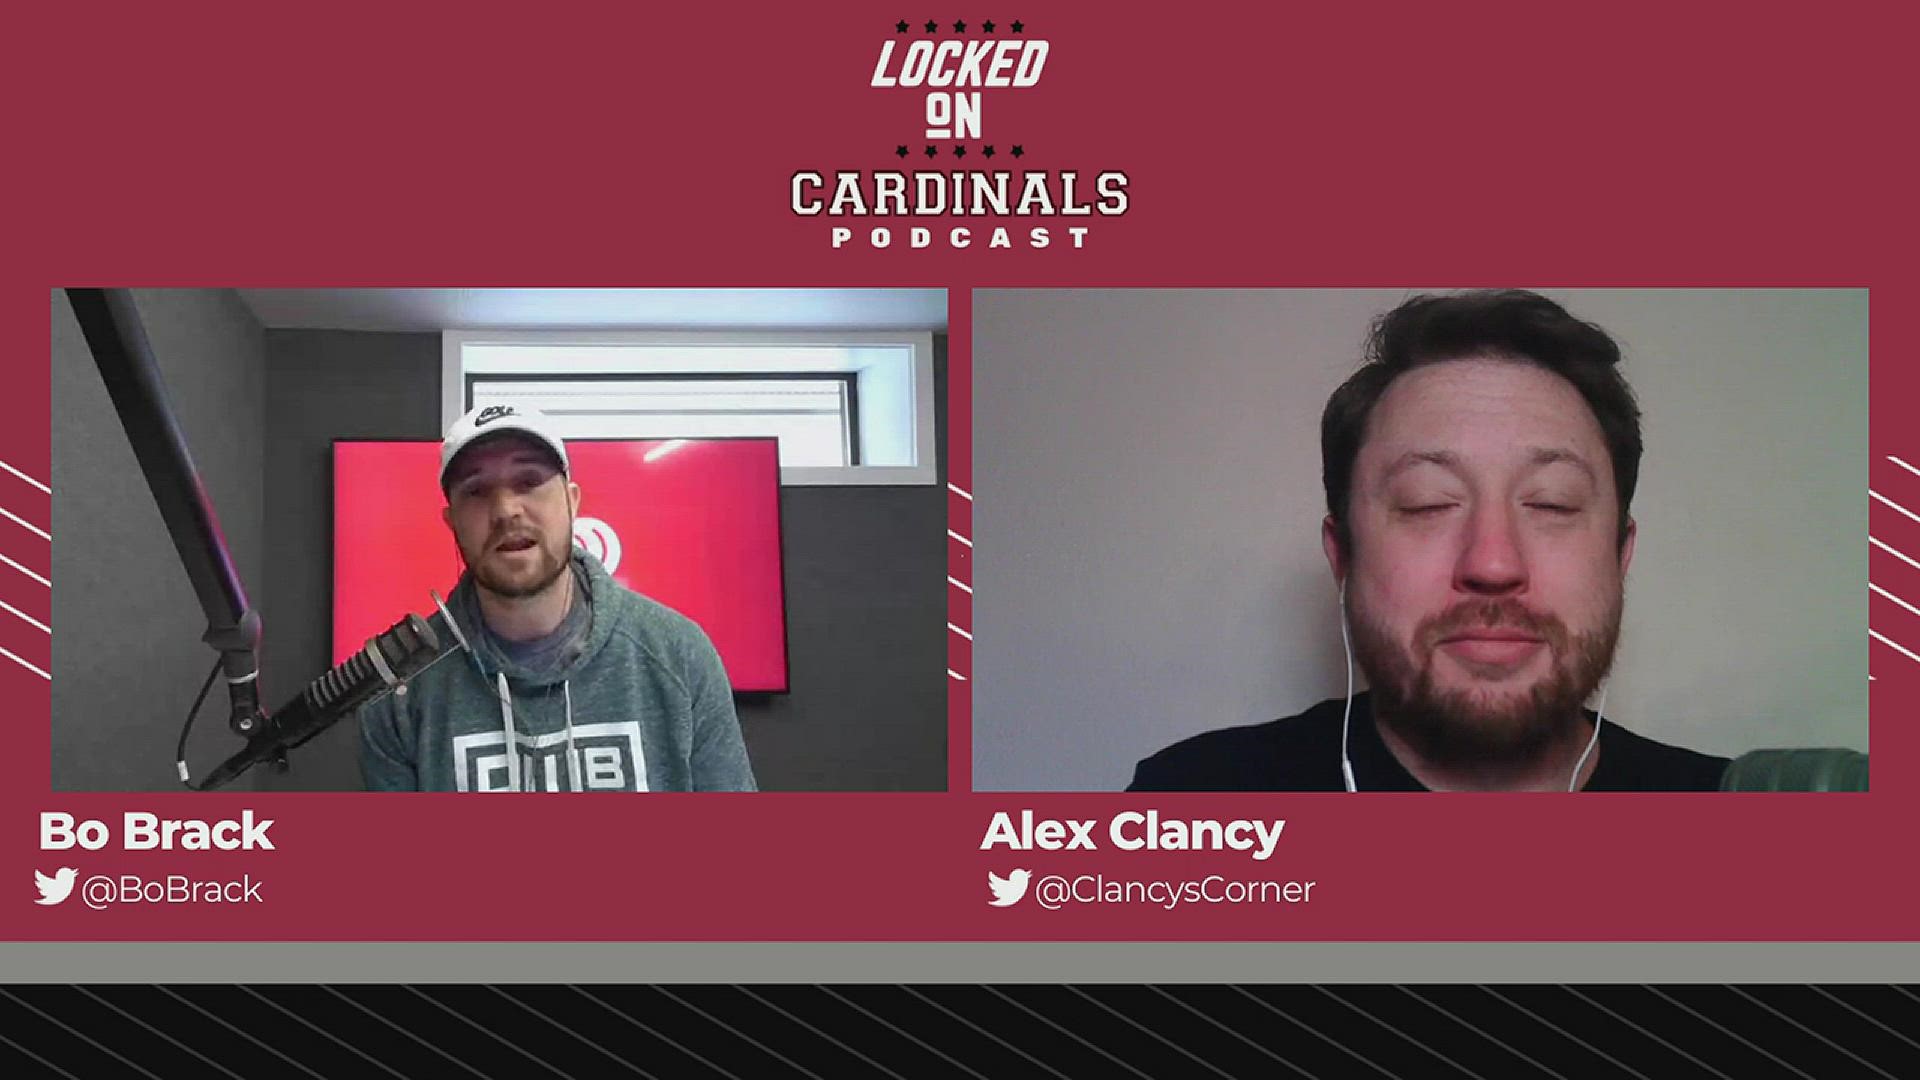 The guys from Locked On podcasts take a look at what the Arizona Cardinals need to do to come away with a win against the Seattle Seahawks.